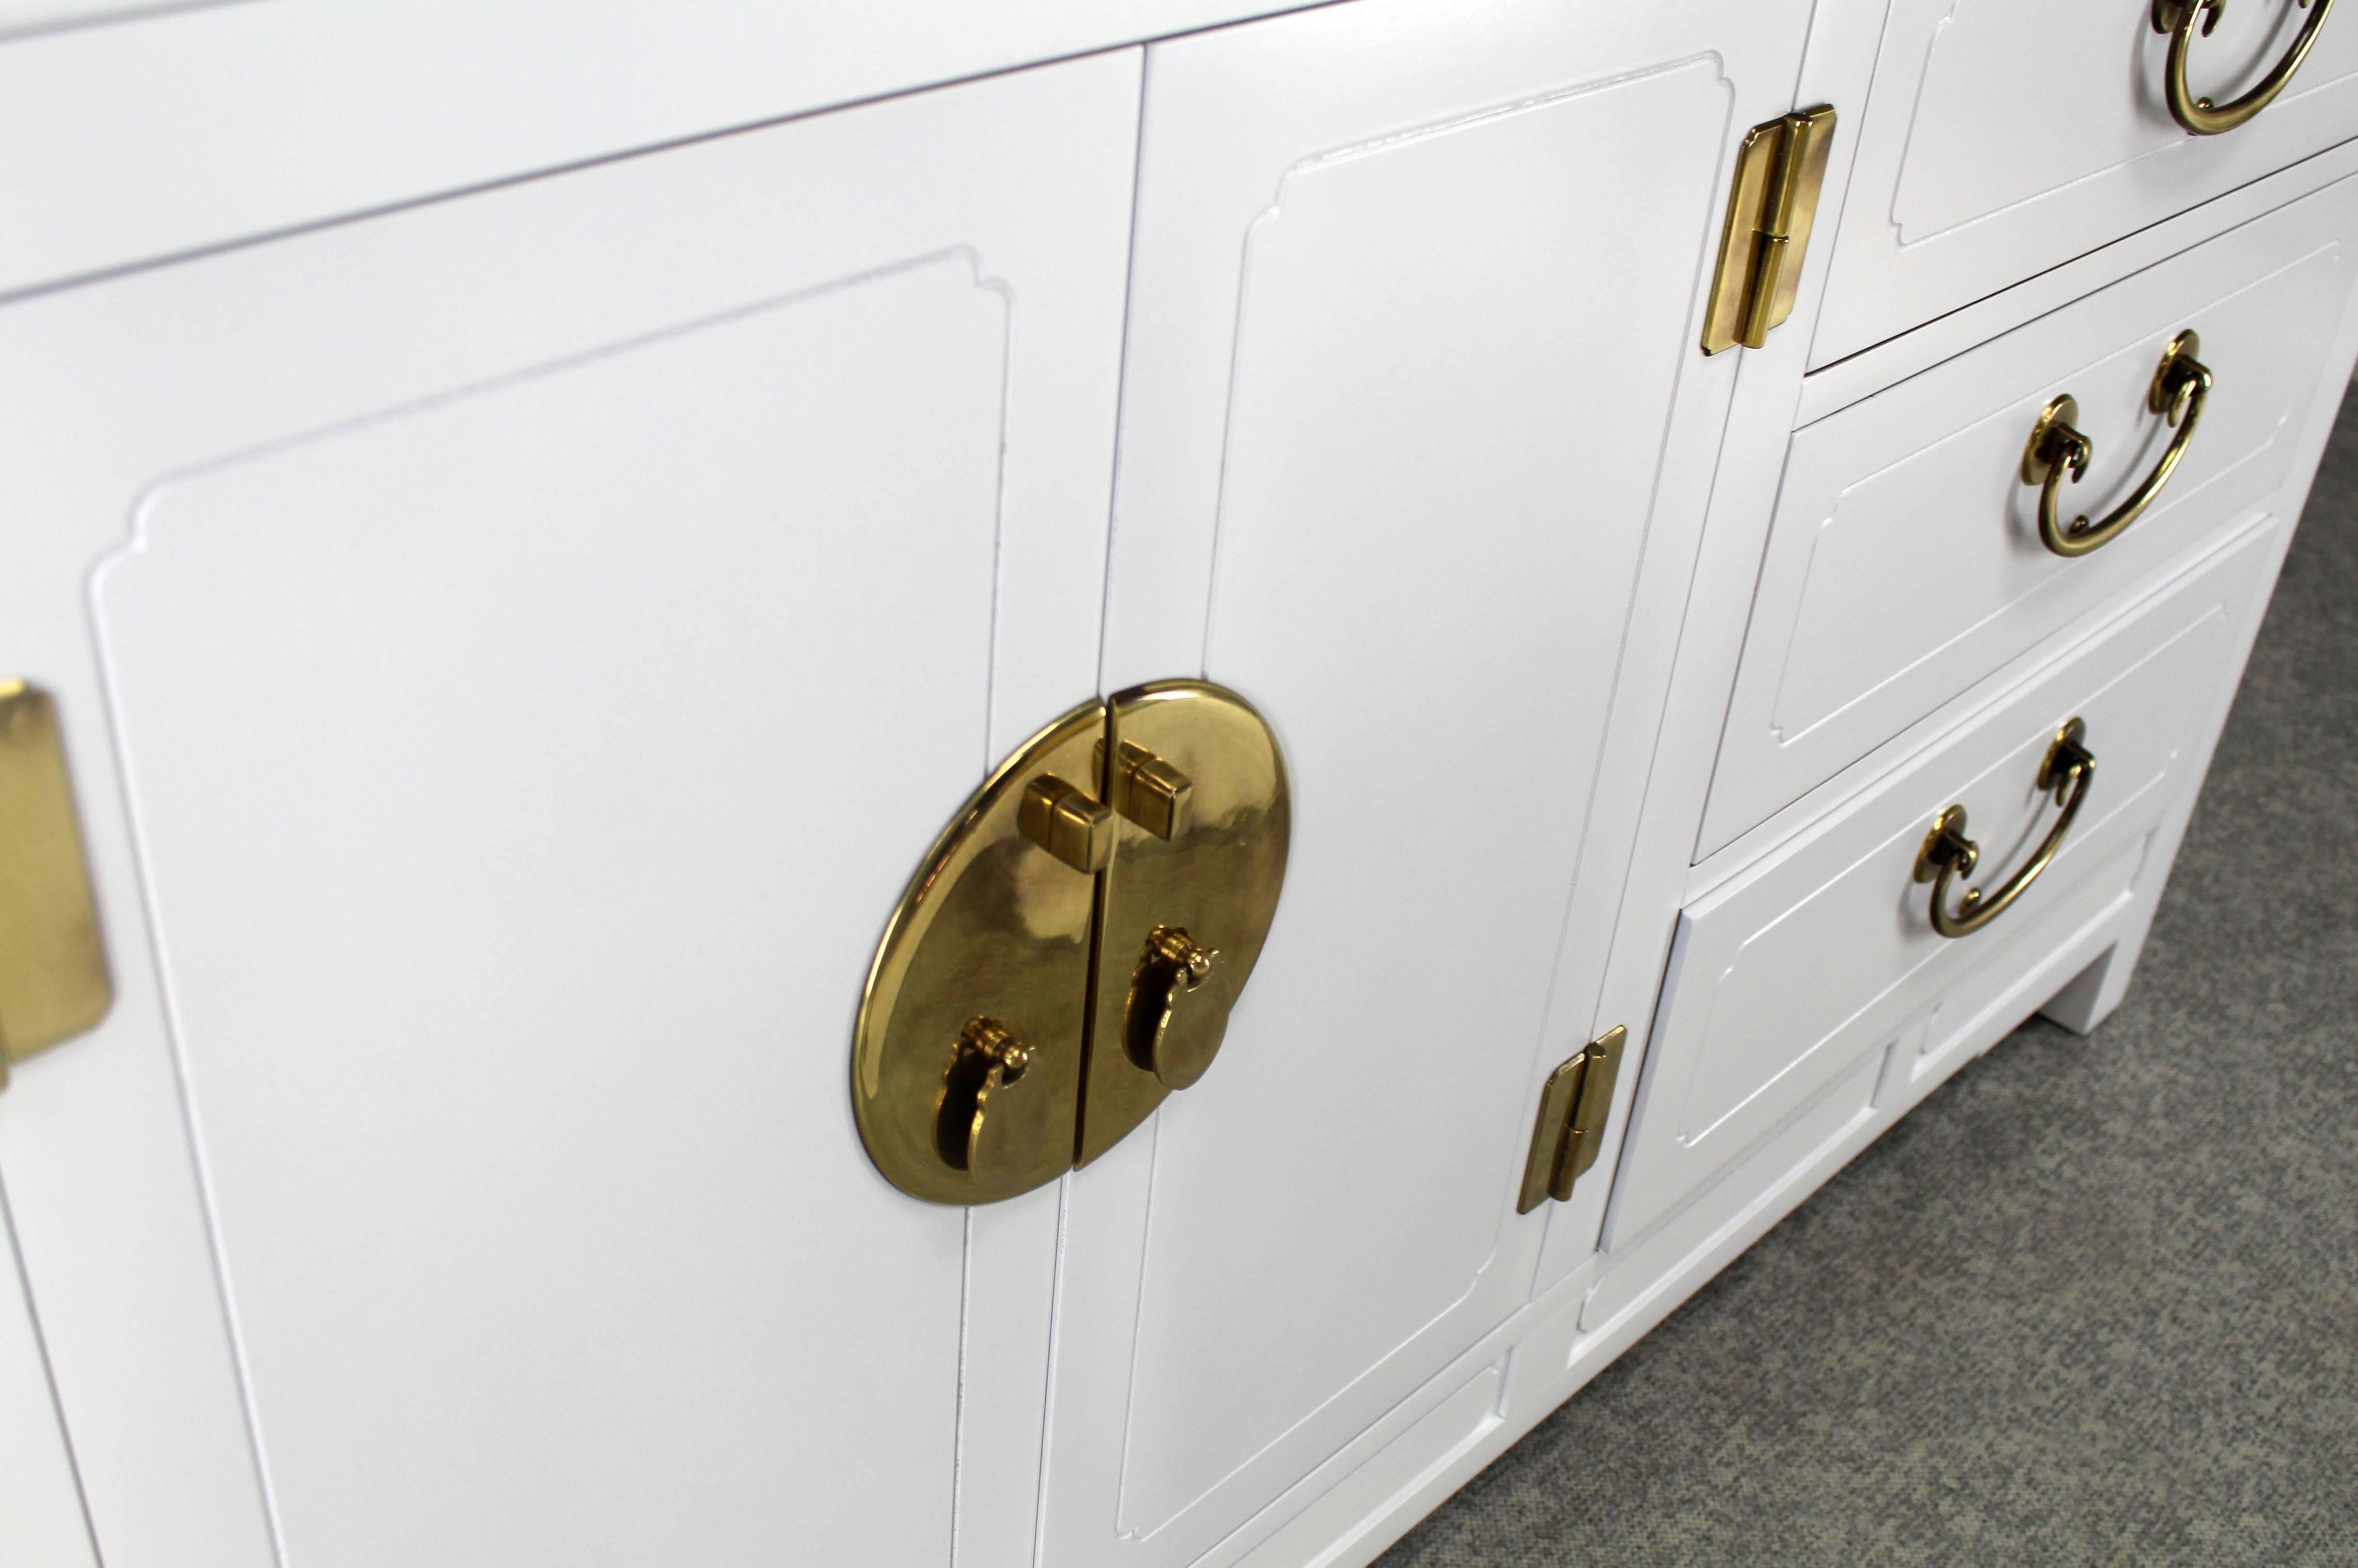 Stunning white lacquer cabinet with polished brass pulls. Medium gloss finish.
   